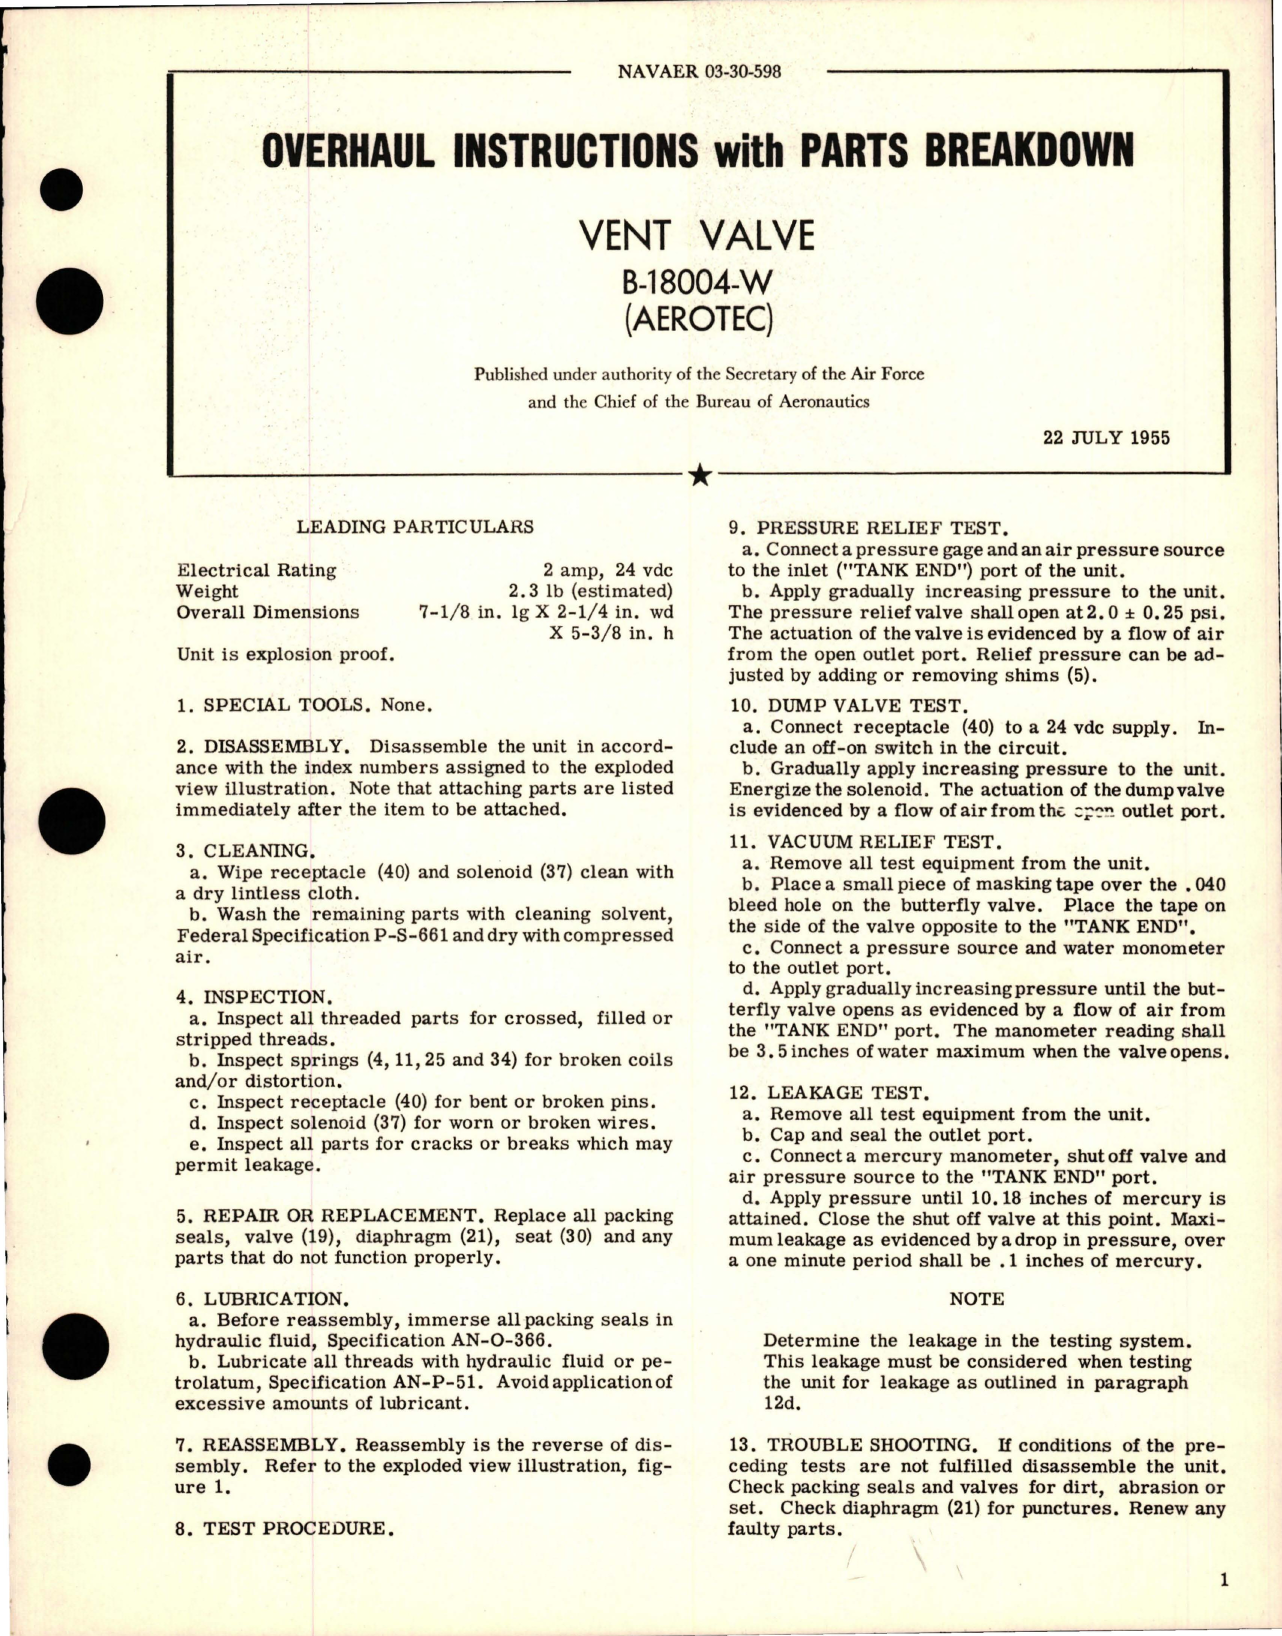 Sample page 1 from AirCorps Library document: Overhaul Instructions with Parts Breakdown for Vent Valve - B-18004-W